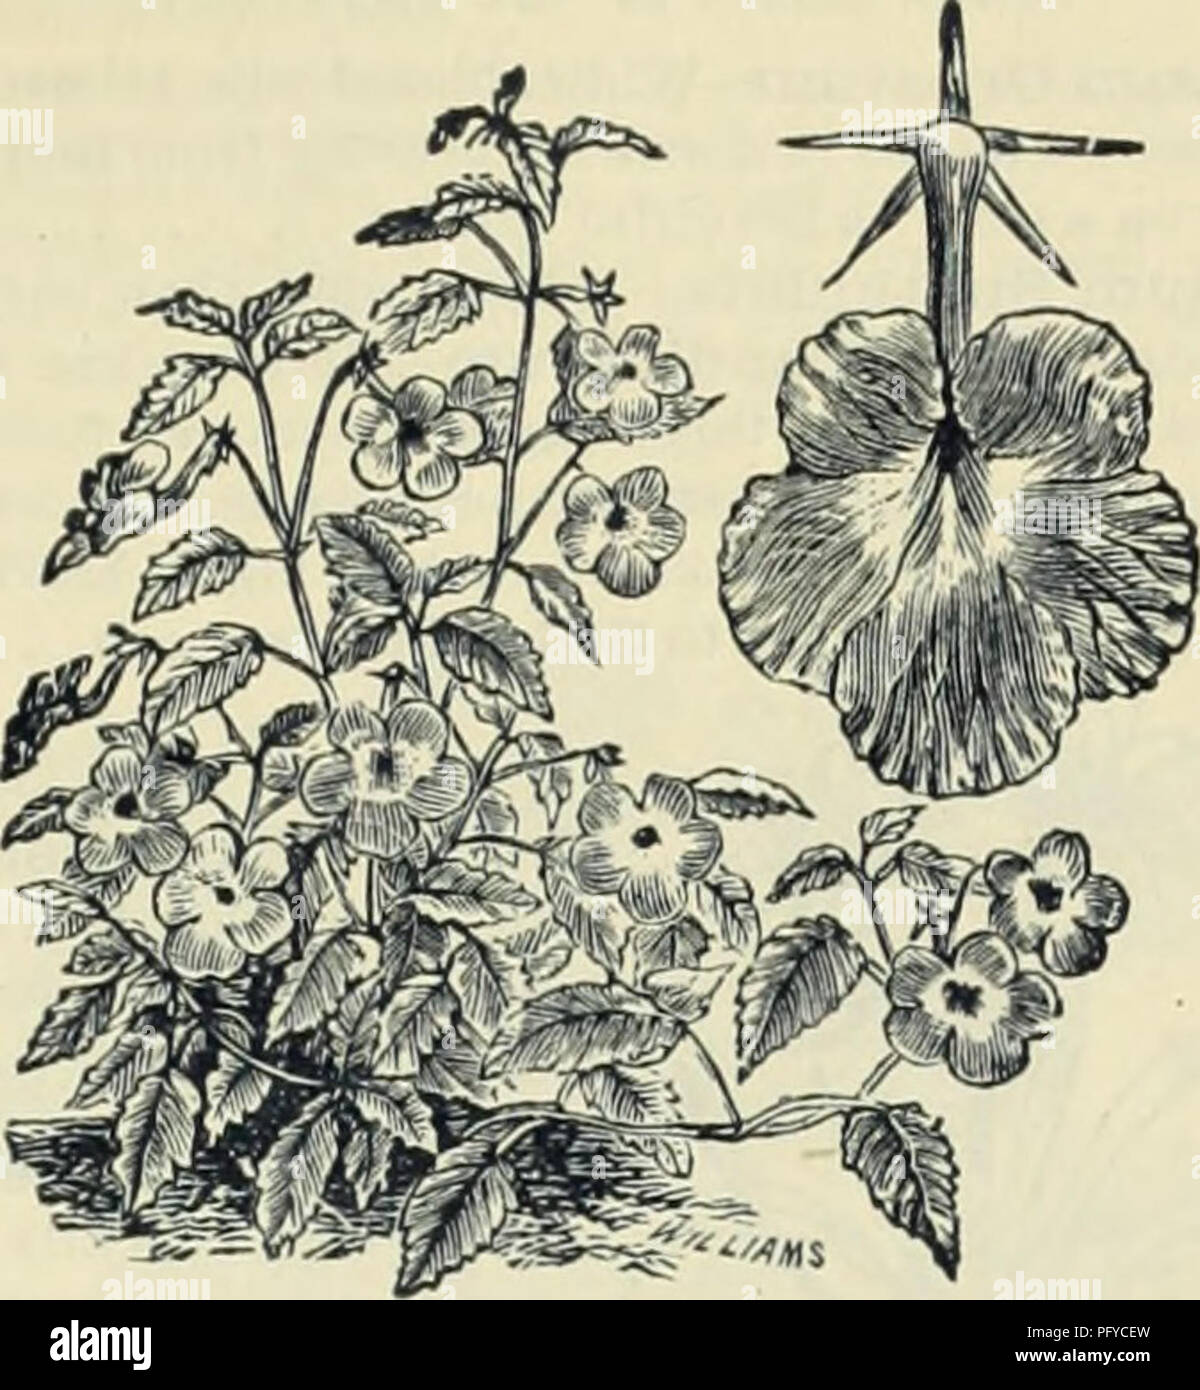 . Currie Bros.' horticultural guide : spring 1888. Nursery stock Wisconsin Catalogs; Flowers Seeds Catalogs; Bulbs (Plants) Seeds Catalogs; Vegetables Seeds Catalogs; Plants, Ornamental Catalogs; Gardening Equipment and supplies Catalogs. ACHIMENES. Cristata—A charming plant for summer bloom- ing in the conservatory or house; flowers pendu- lous, of a rich shade of blue; each 15 AGAVE AMERICANA. The well known century plant; very ornamental, especially the variegated varieties; each, 125c to 1.00 AGAPANTHUS. This interesting iilant should be in every collection. It requires very little attenti Stock Photo